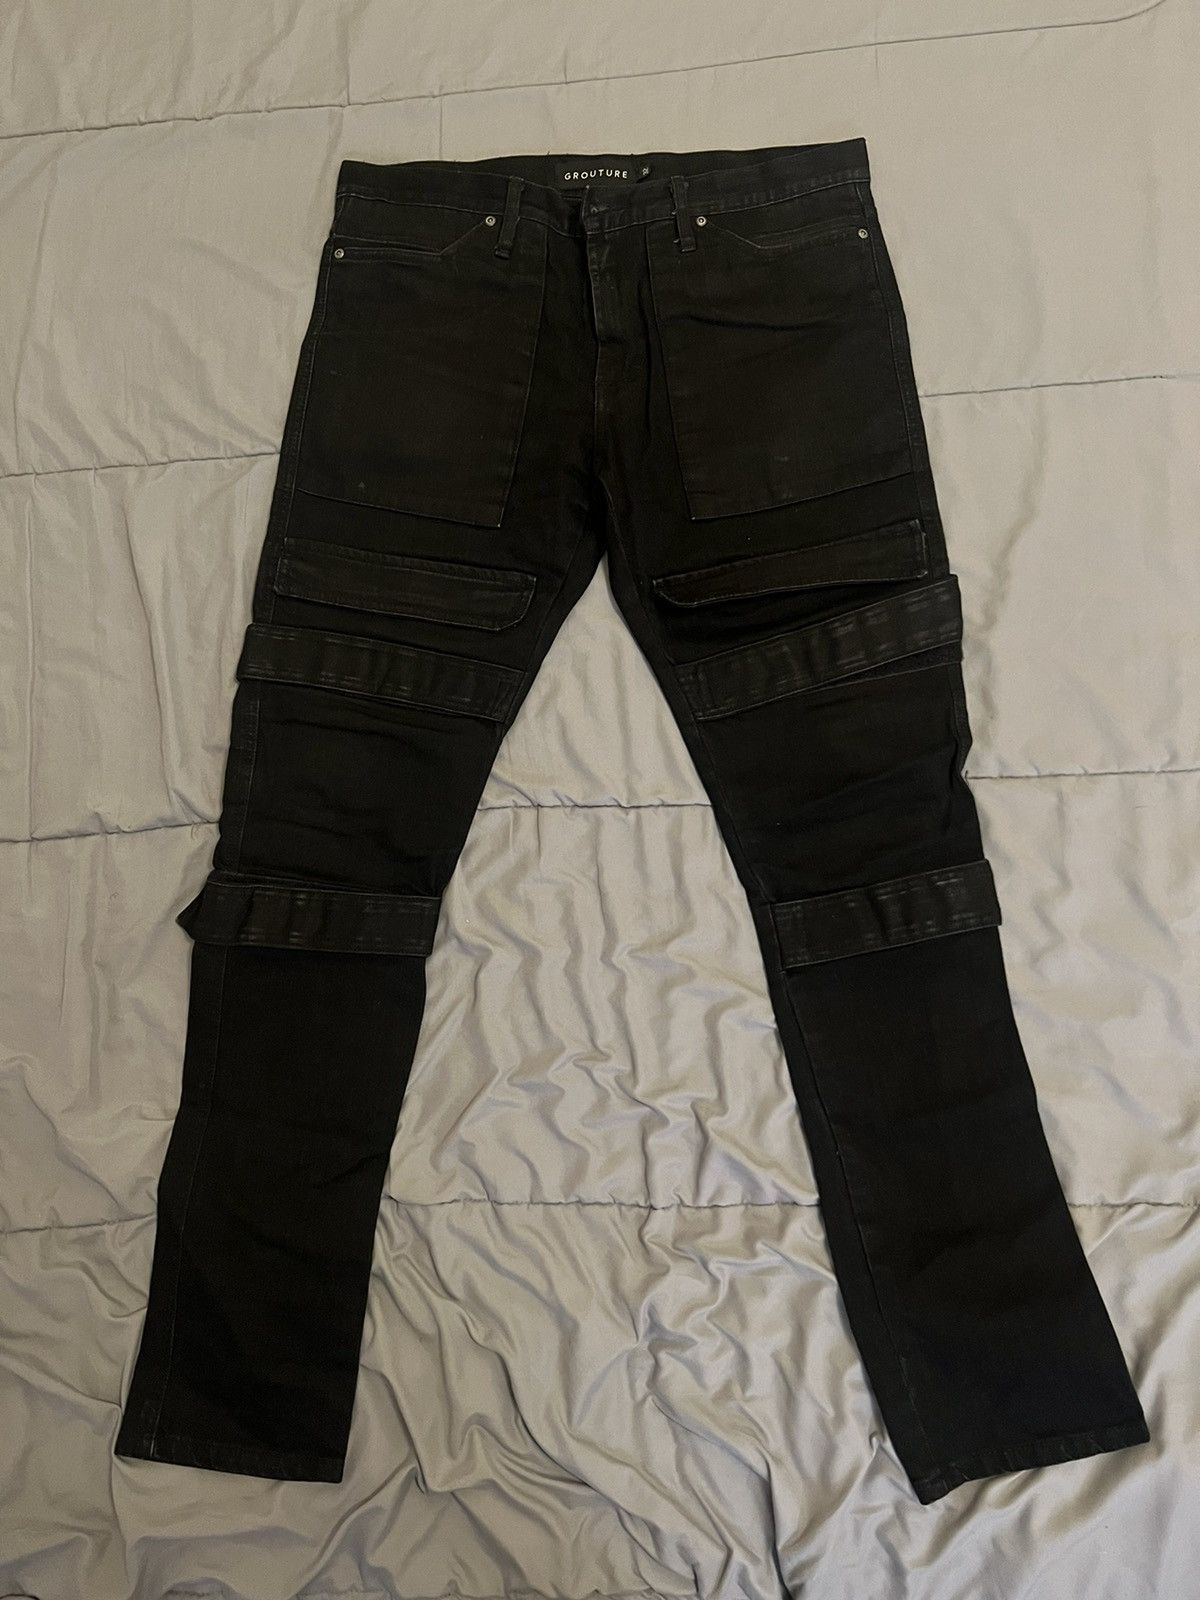 Archival Clothing Grouture black strap pants | Grailed